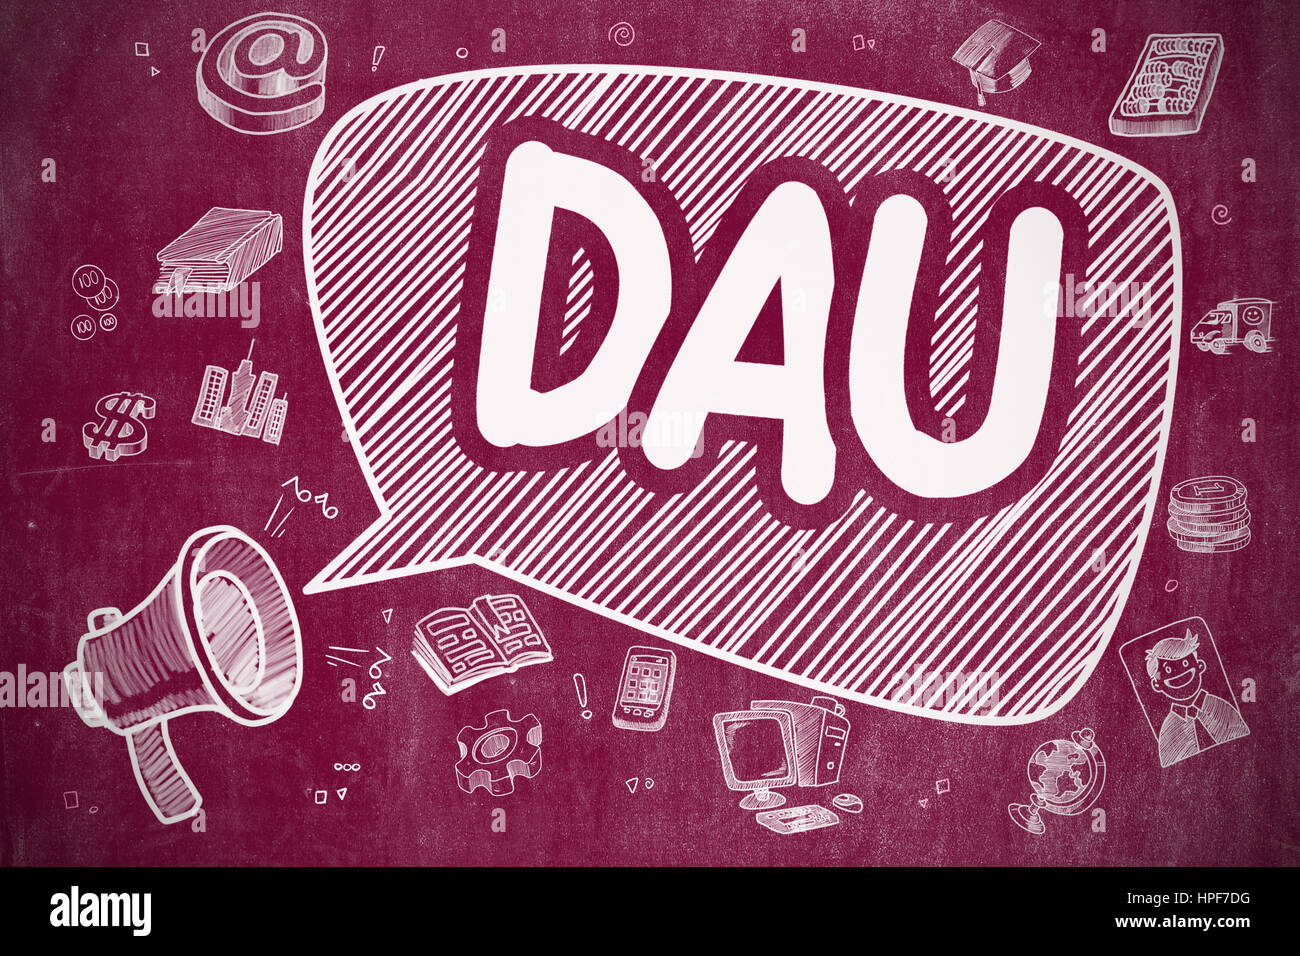 Speech Bubble with Text DAU - Daily Active Users Hand Drawn. Illustration on Red Chalkboard. Advertising Concept. Stock Photo